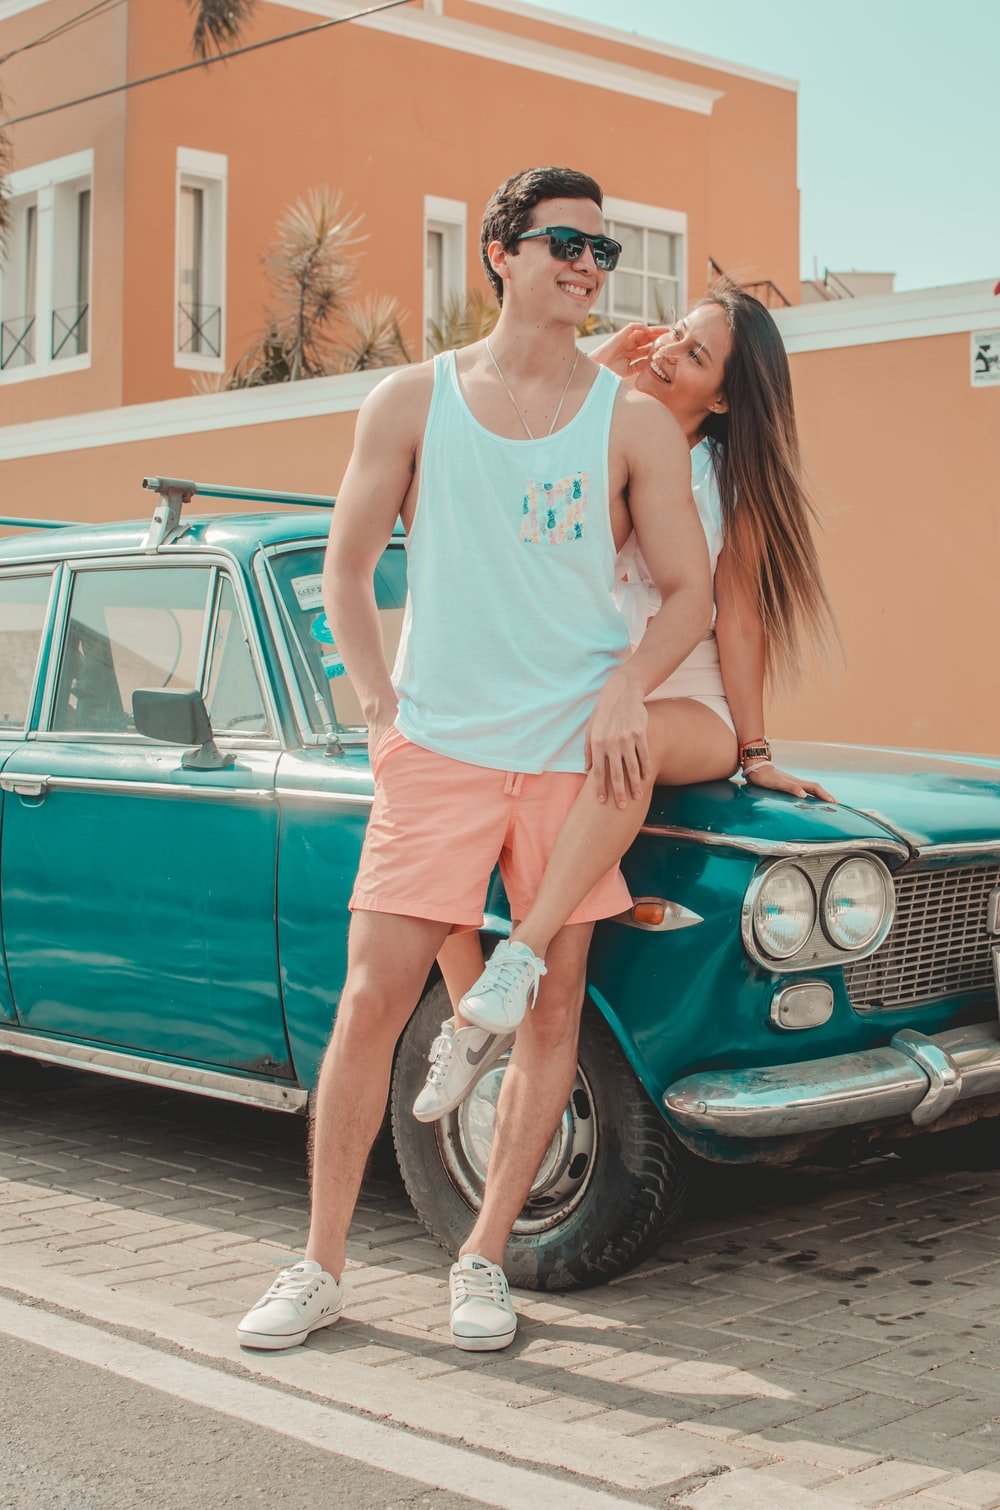 Couple Summer Picture. Download Free Image